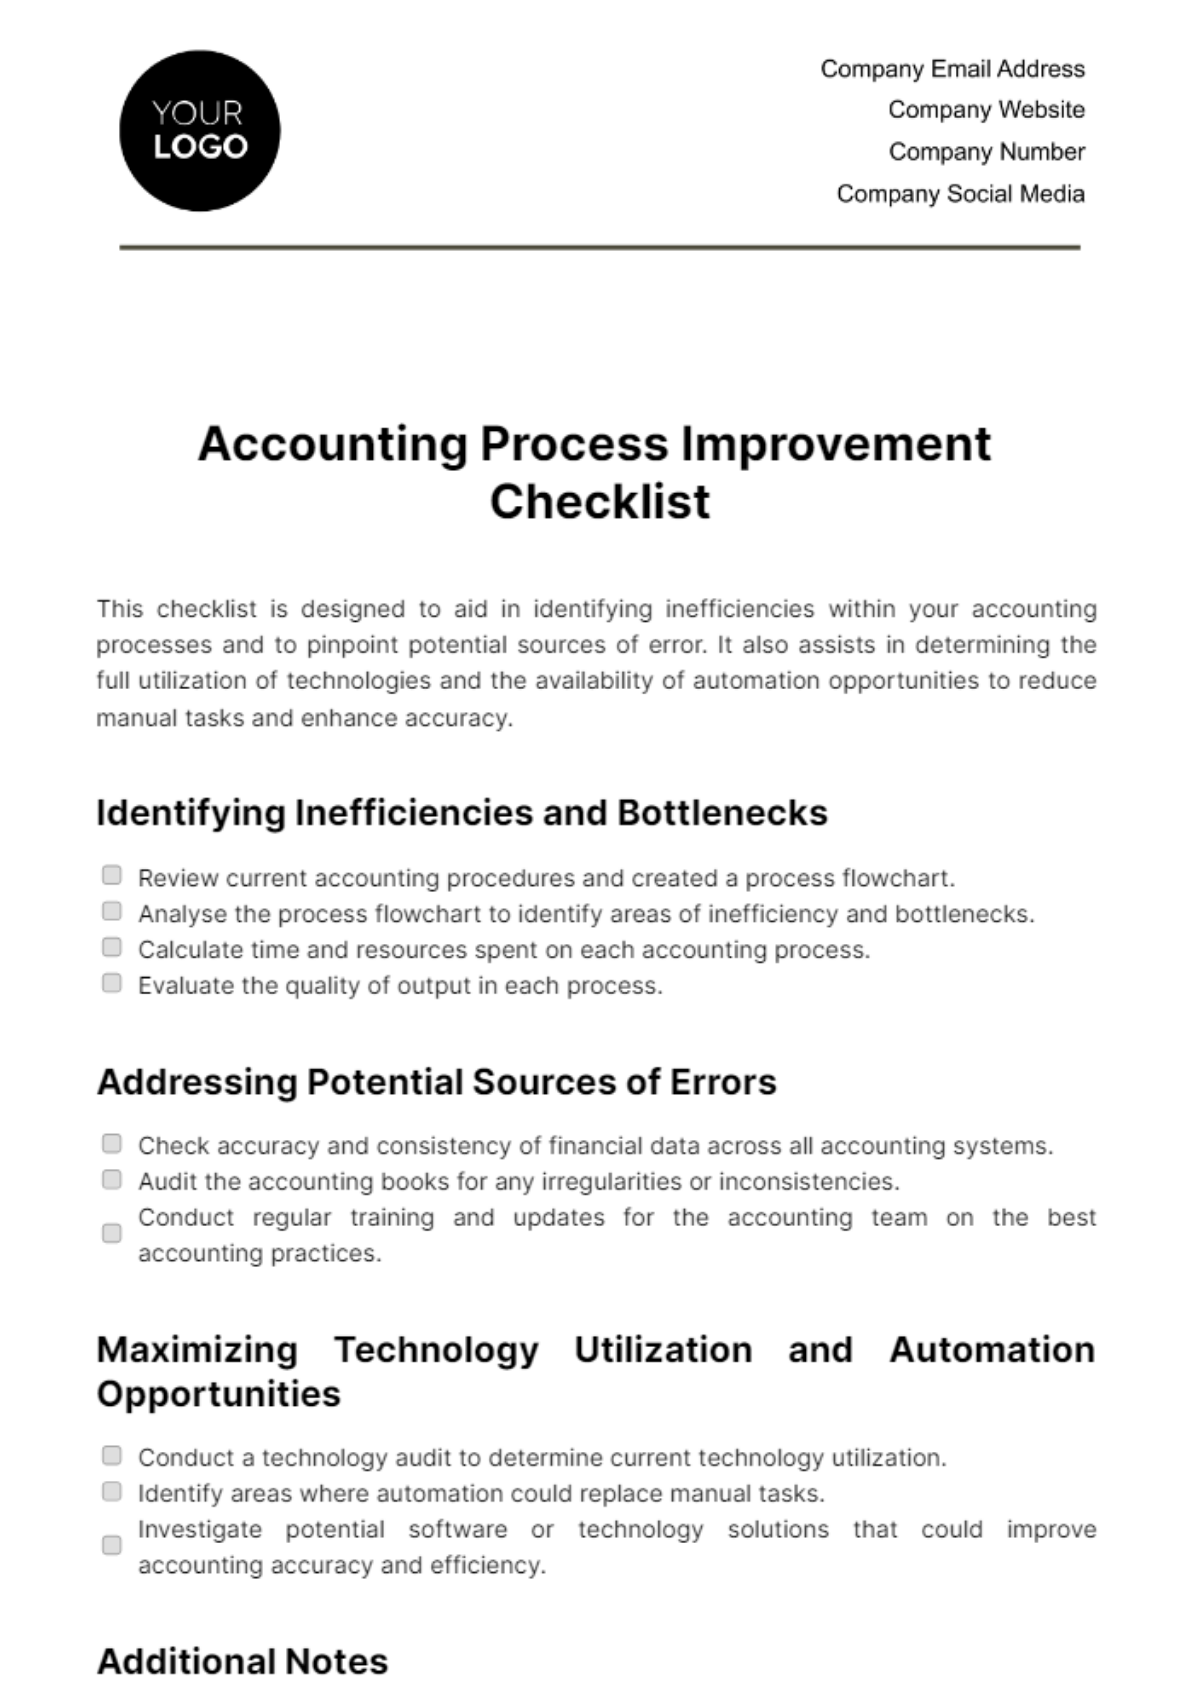 Accounting Process Improvement Checklist Template